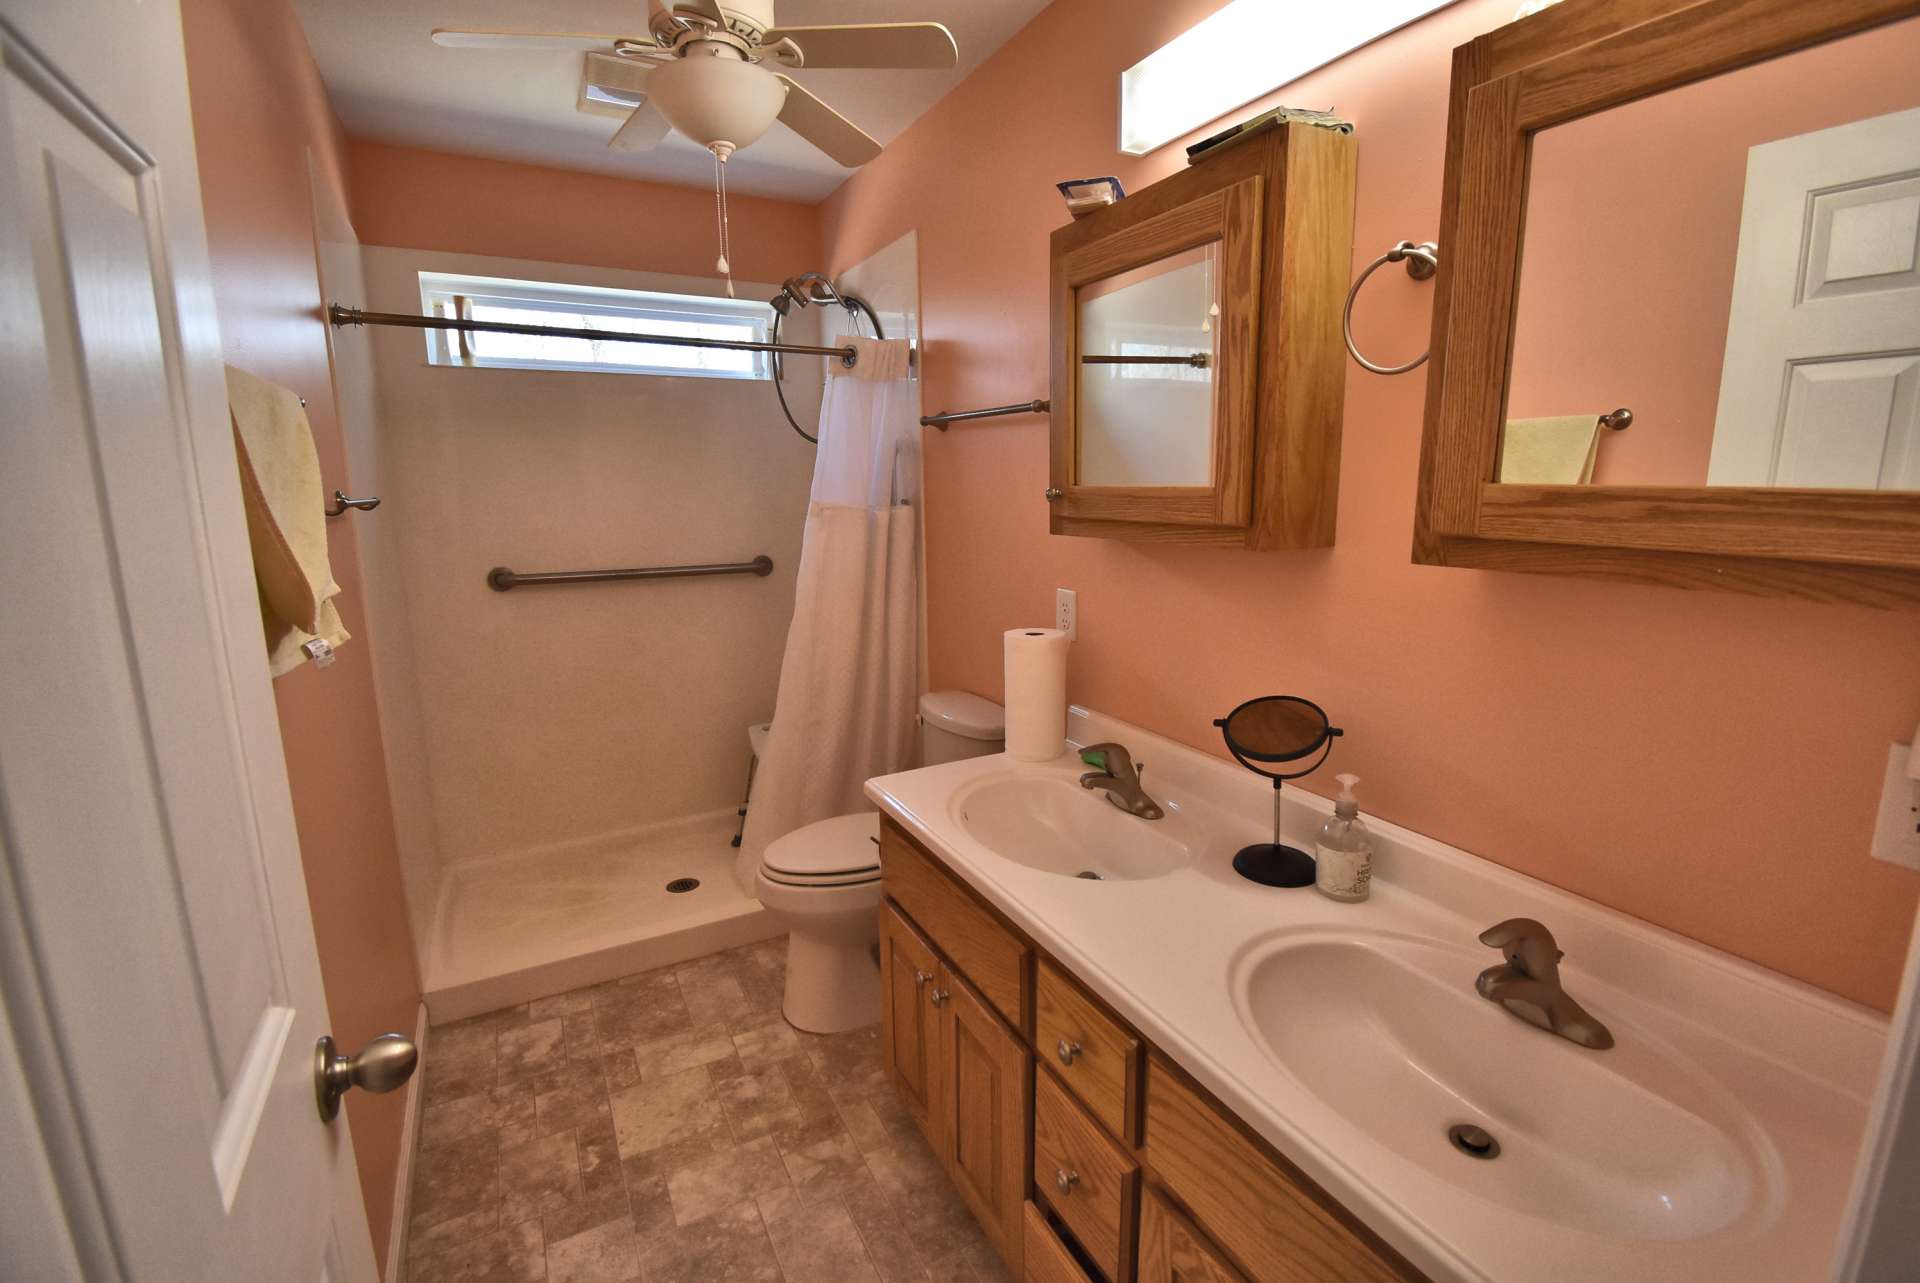 The main level bath offers a double vanity and walk-in shower.